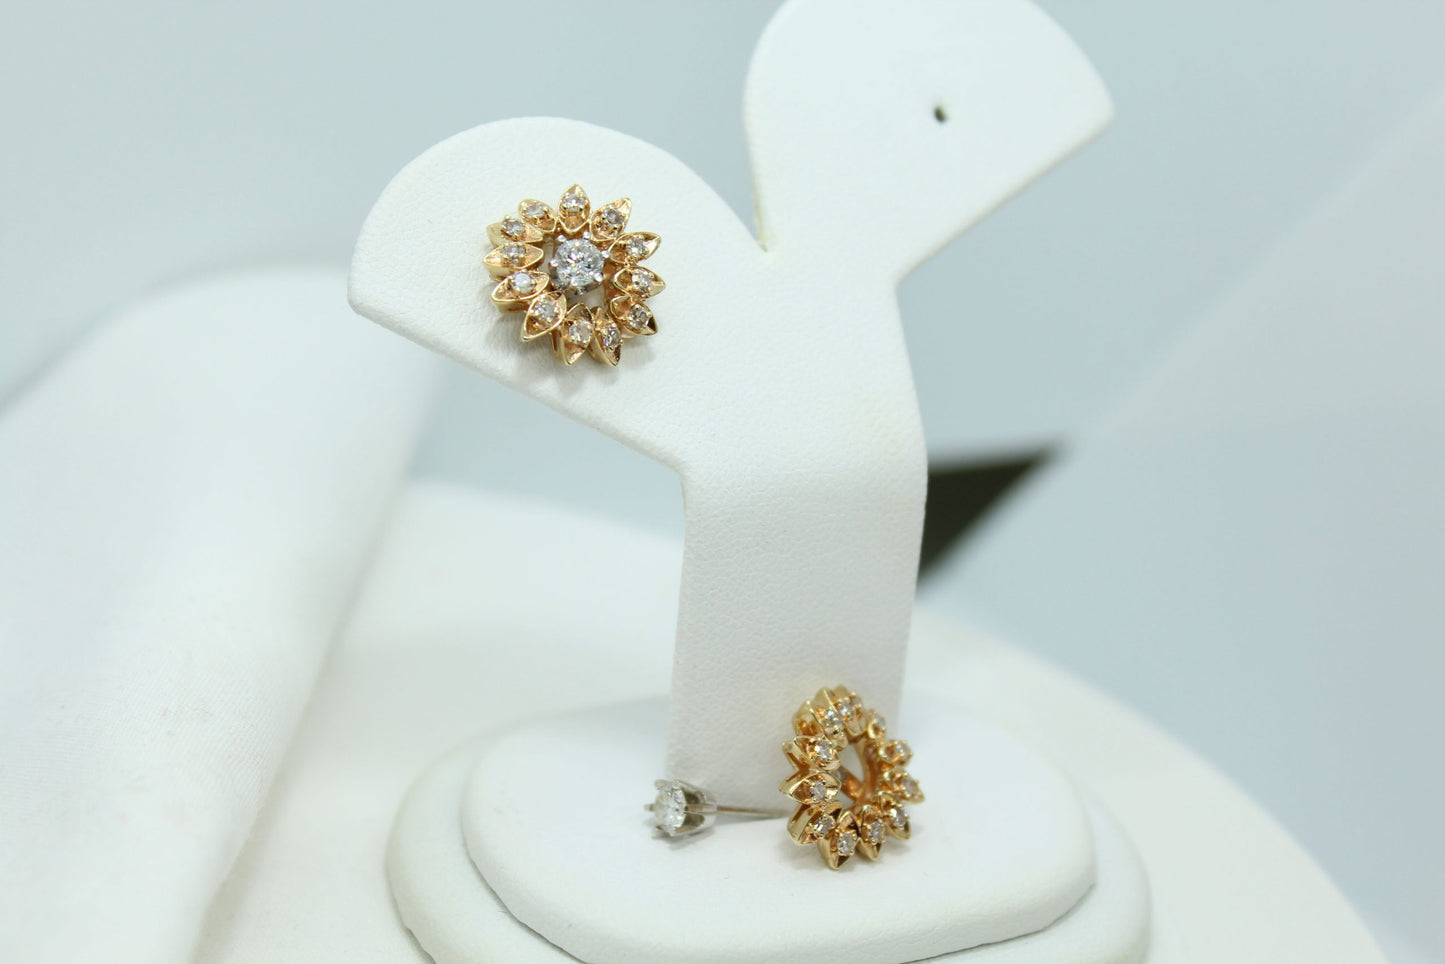 .50CT Diamond TW 14KT YG Jackets Only (DIA Studs Sold Separately)